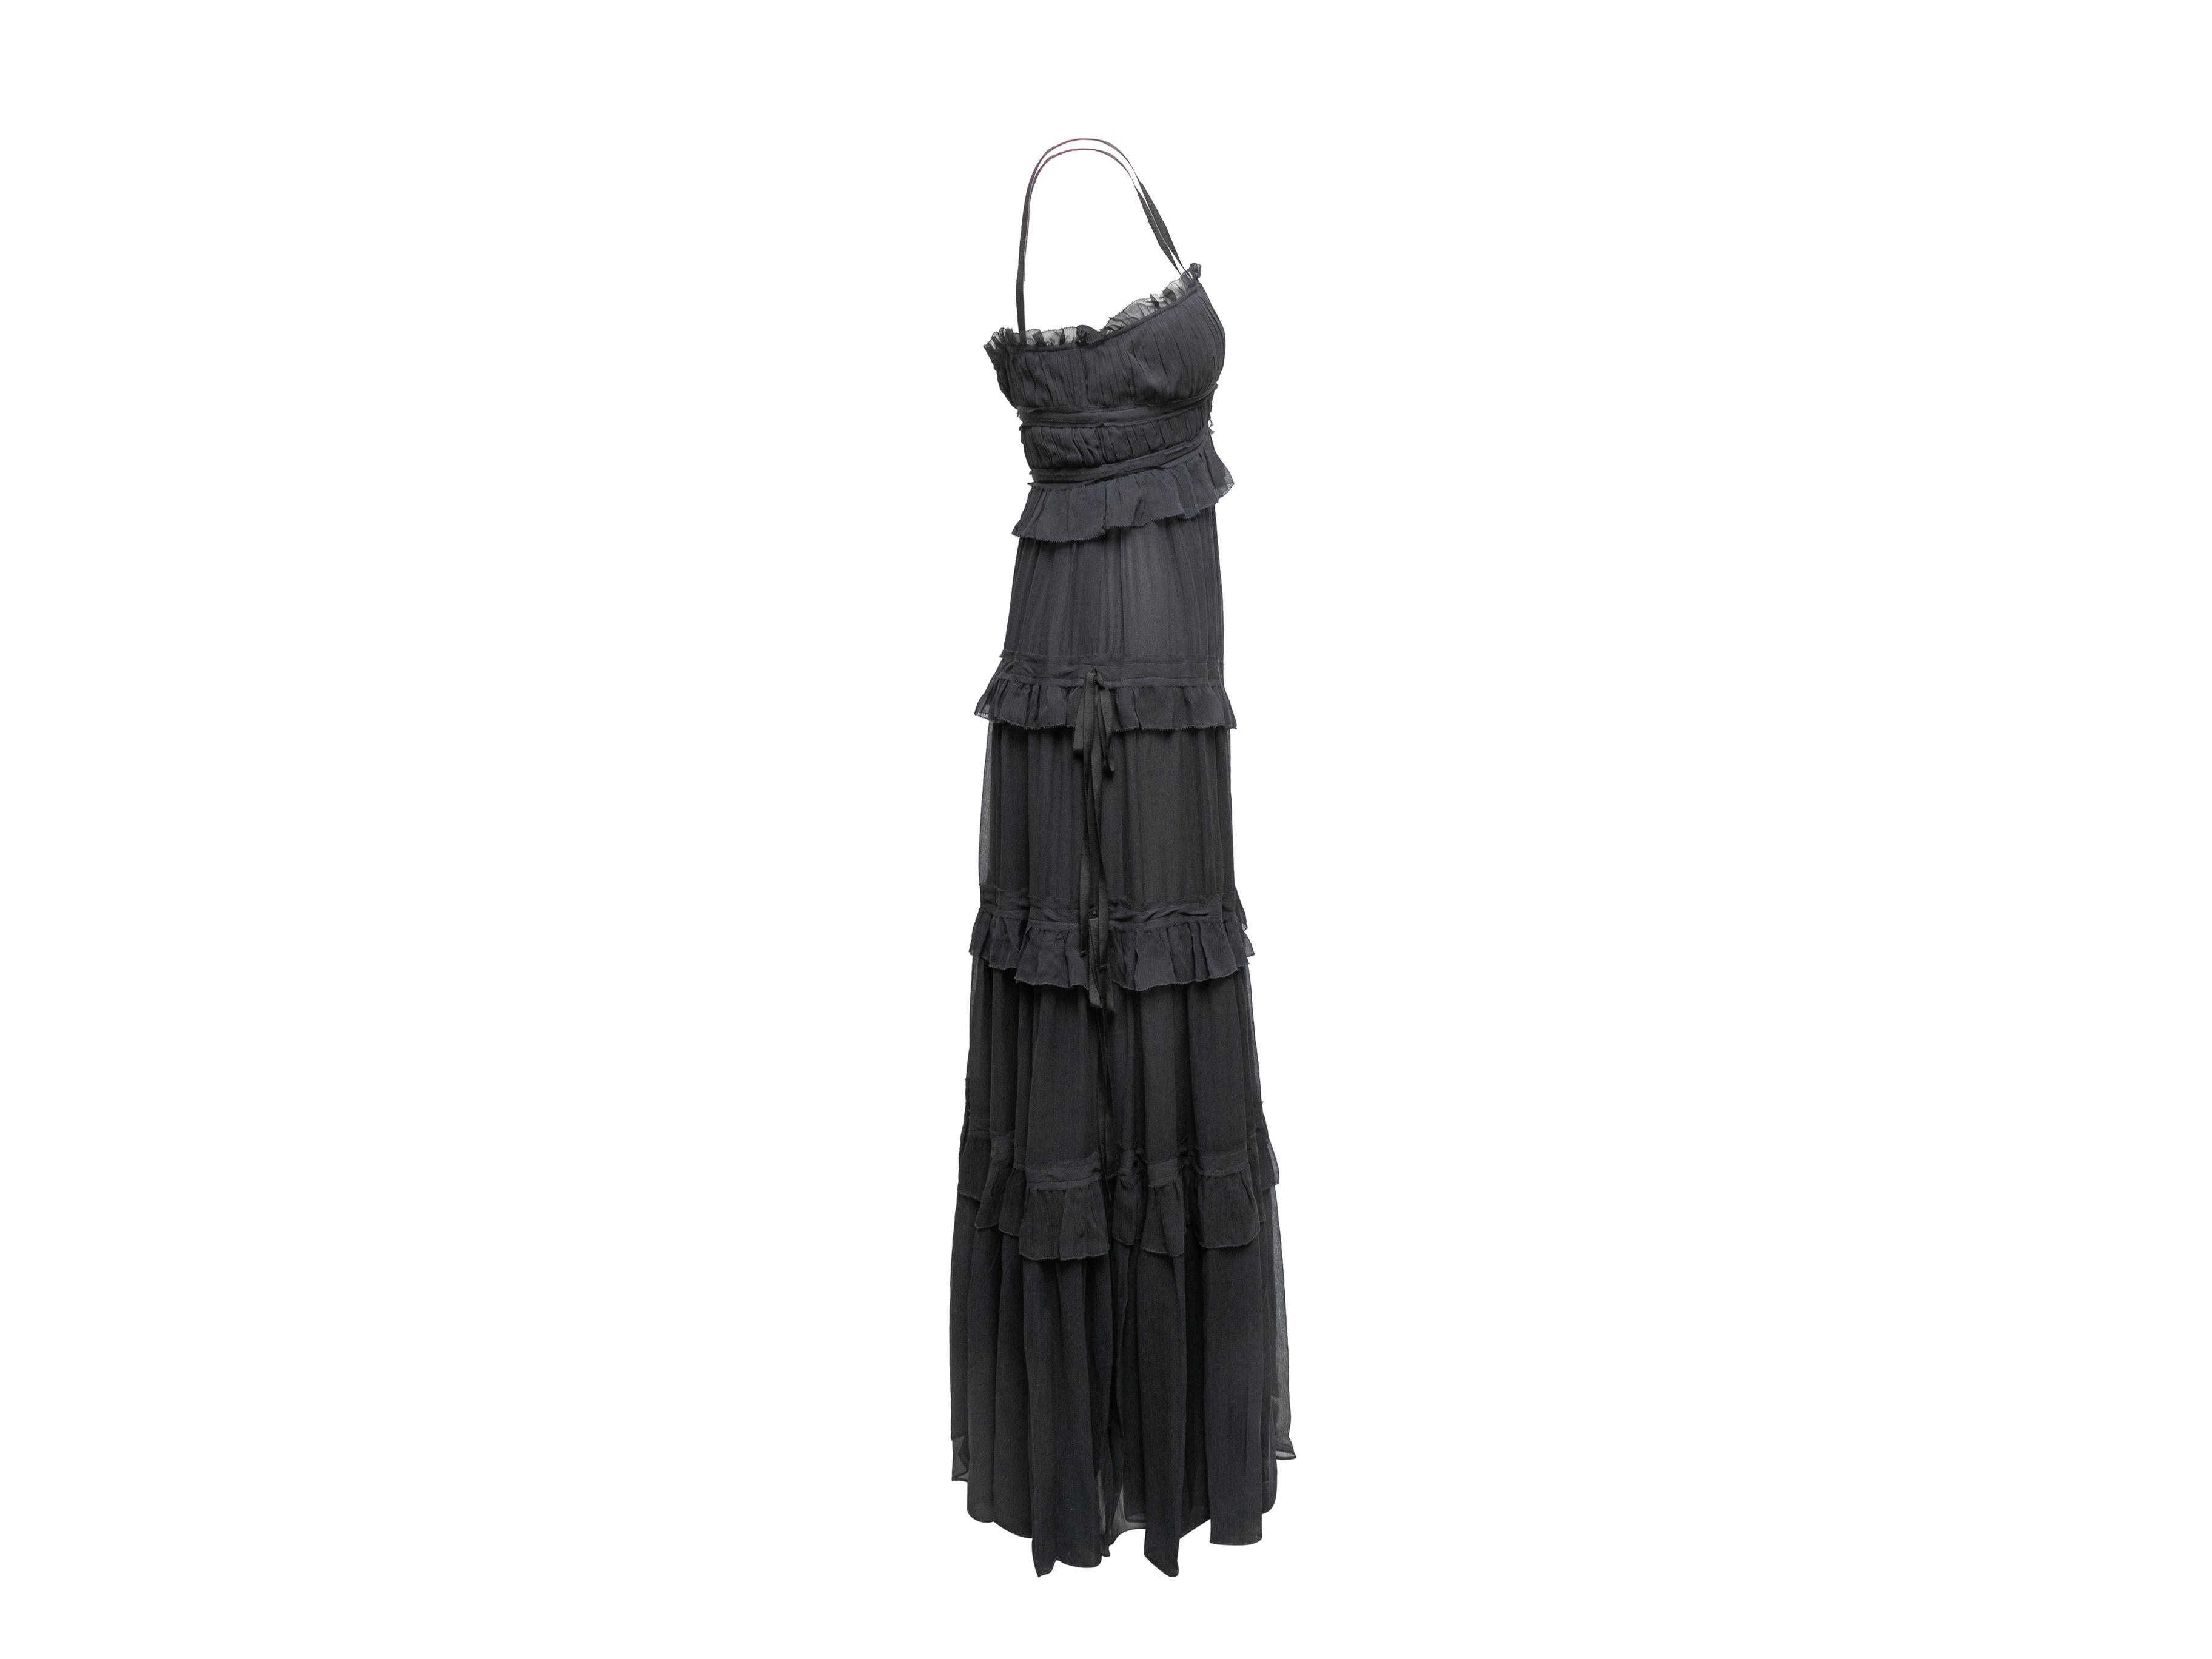 Navy silk Agathe maxi dress by Ulla Johnson. From the Fall/Winter 2022 Collection. Narrow straps. V-neck. Tiered bodice and skirt. Zip closure at side. 32